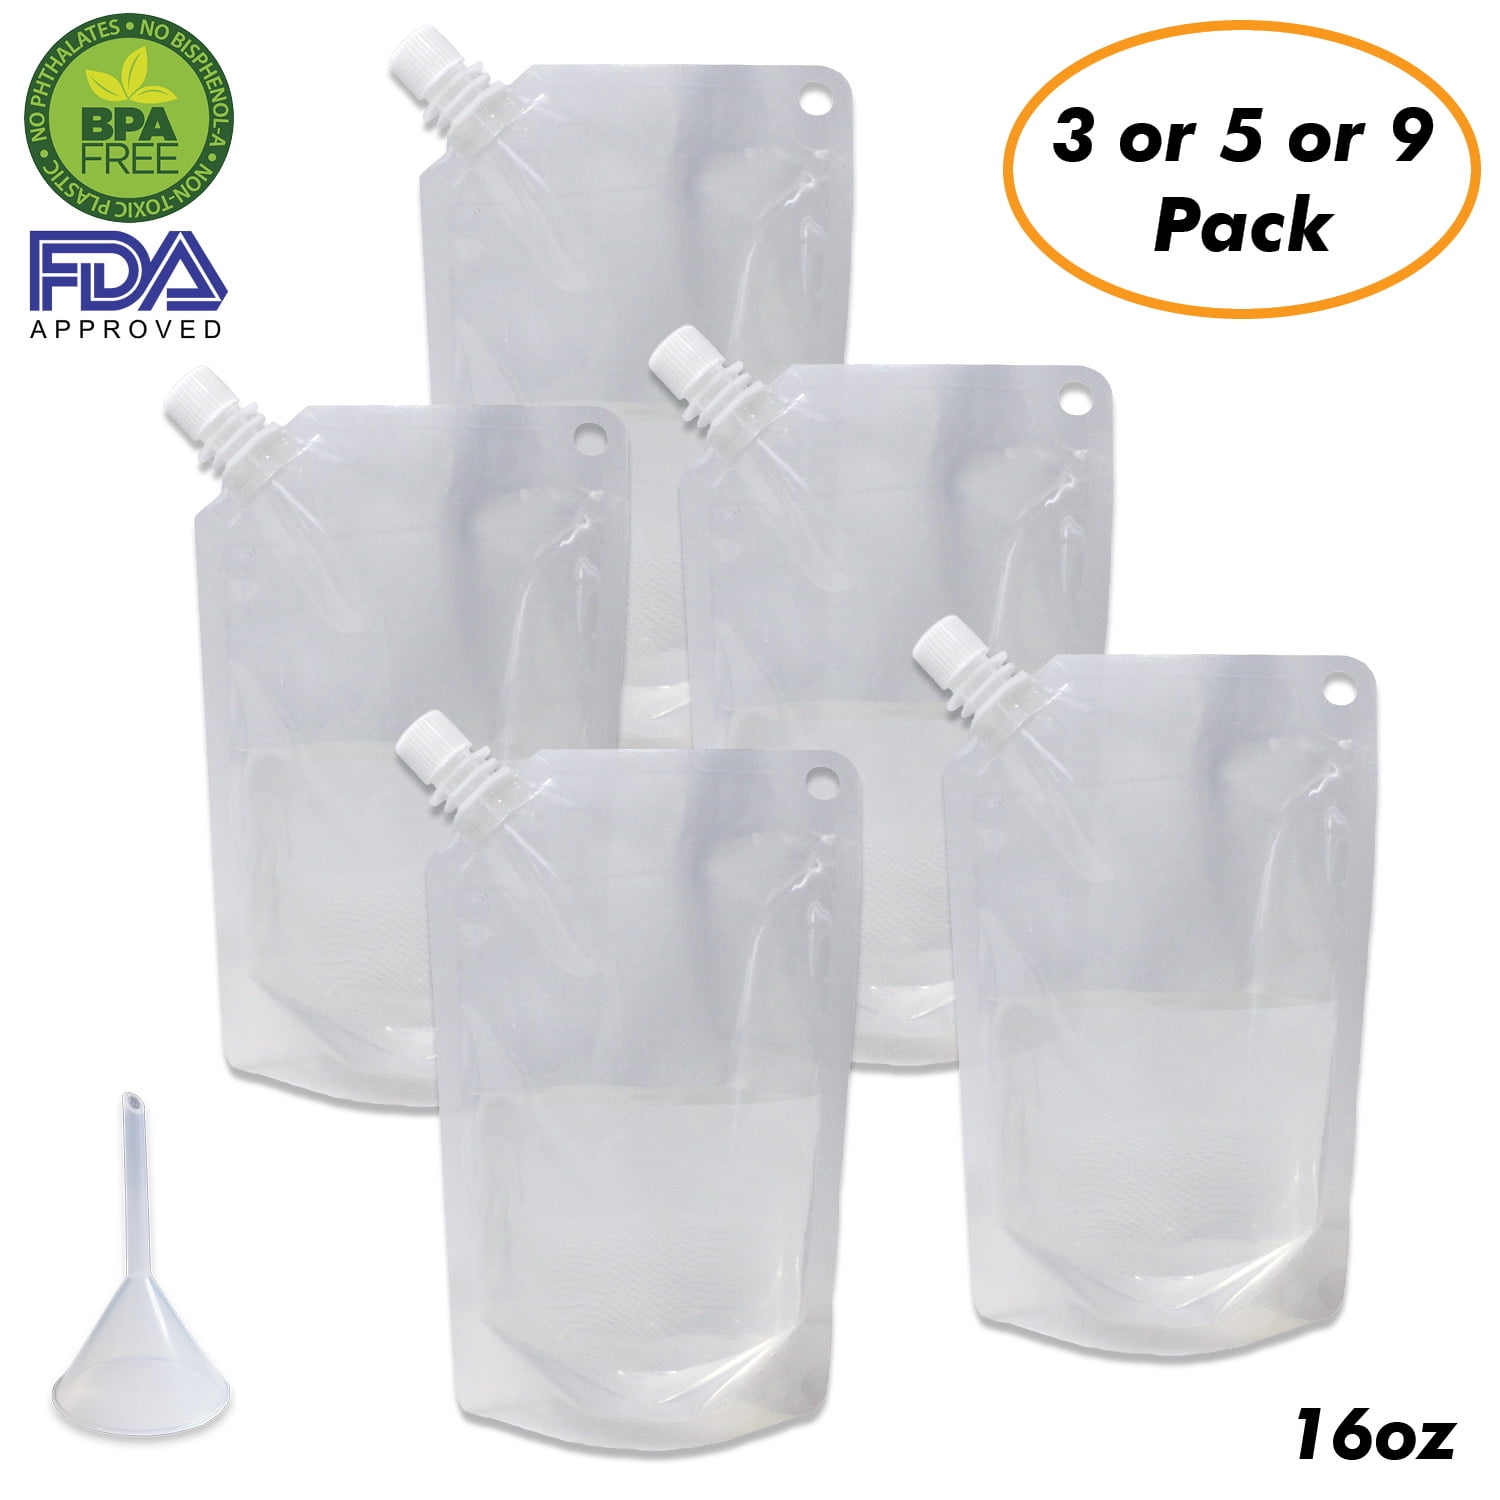 9 Reusable Plastic Liquor Pouch Concealable Drinking Flasks Cruise Bags+Funnel 